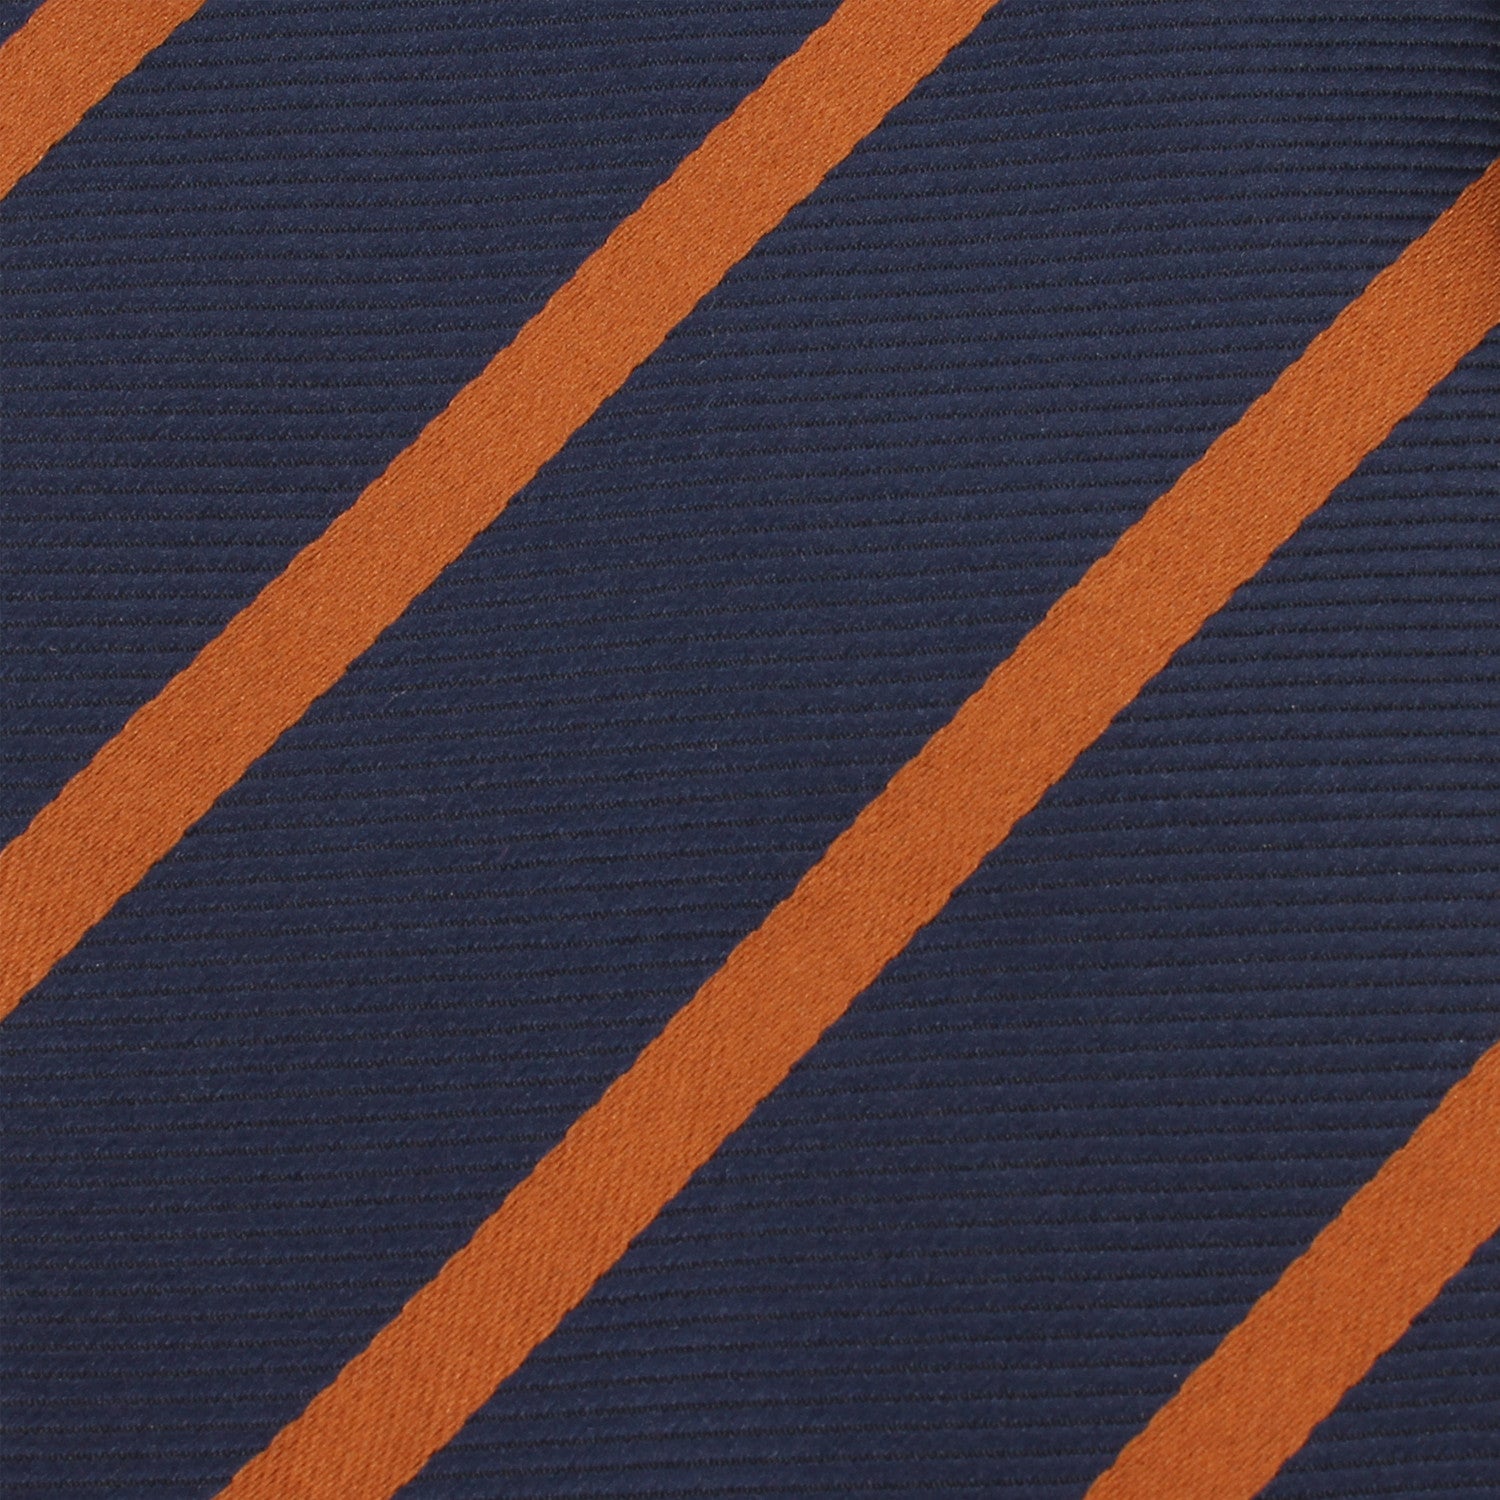 Navy Blue Tie with Striped Brown Fabric